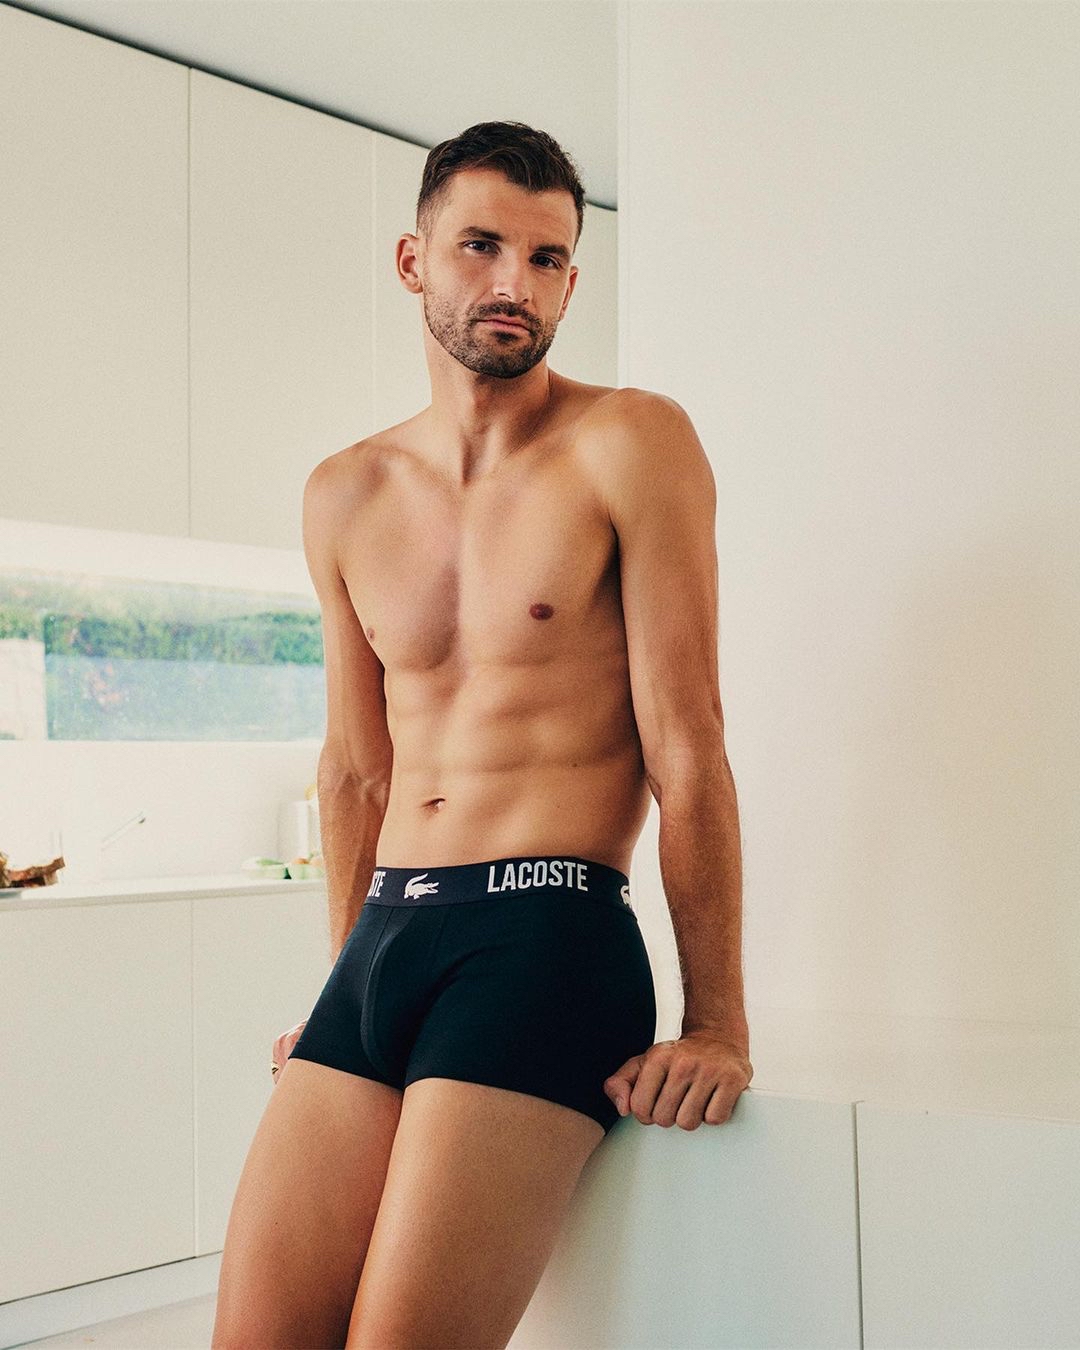 DAMAN Magazine on X: Bulgarian tennis player Grigor Dimitrov enters the  modelling world, appearing gorgeous as the face of Lacoste's underwear  collection Read more   / X